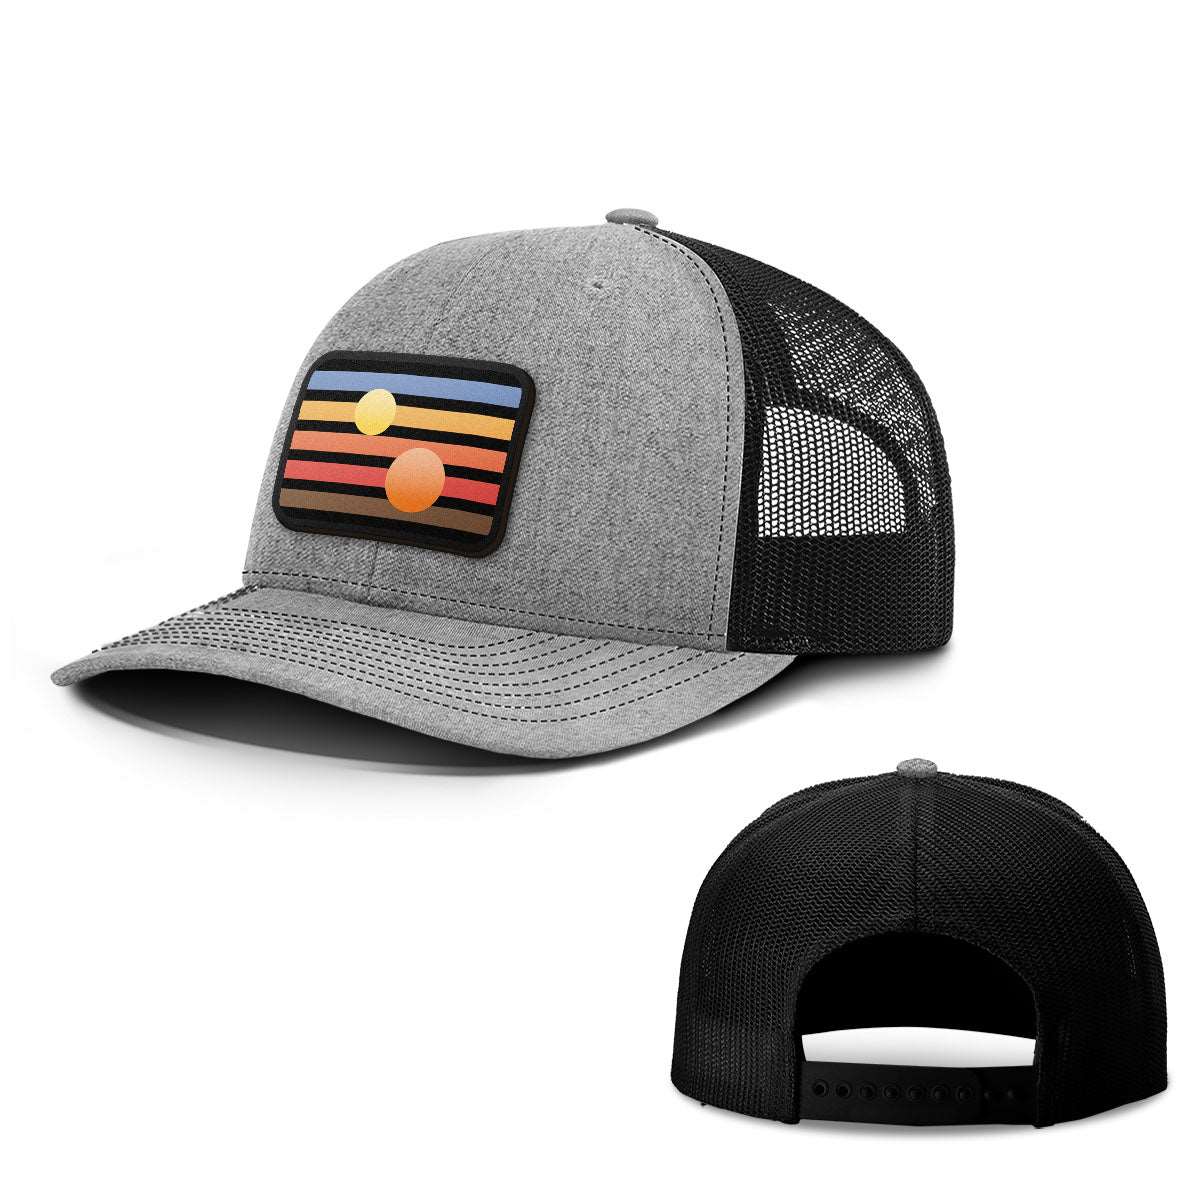 Artistic Tatooine Patch Hats - BustedTees.com